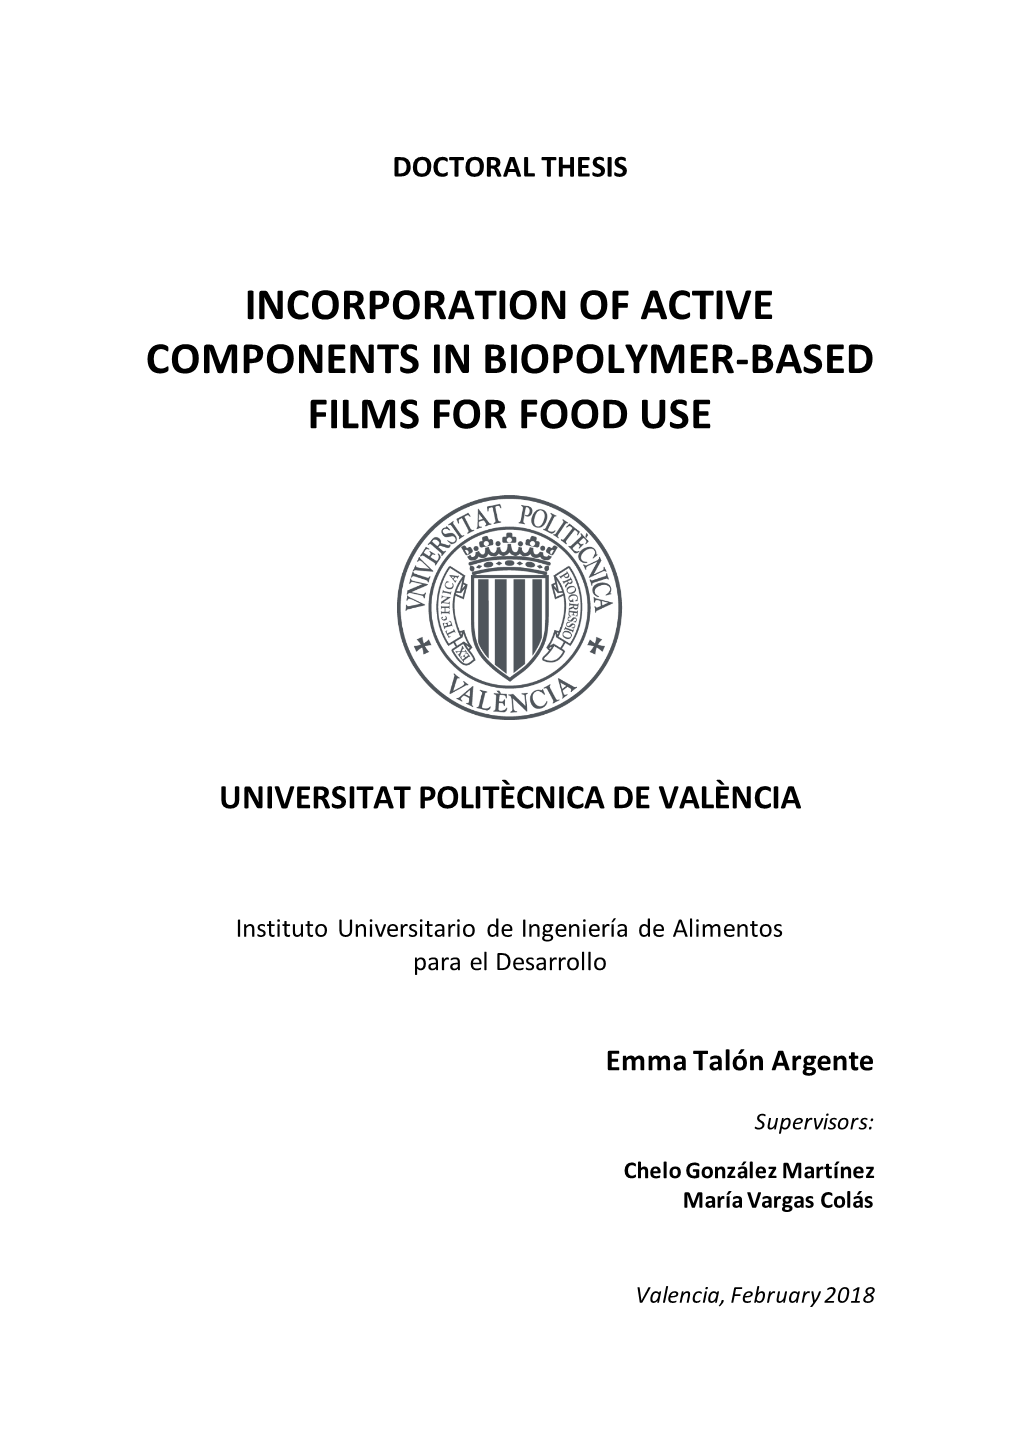 Incorporation of Active Components in Biopolymer-Based Films for Food Use